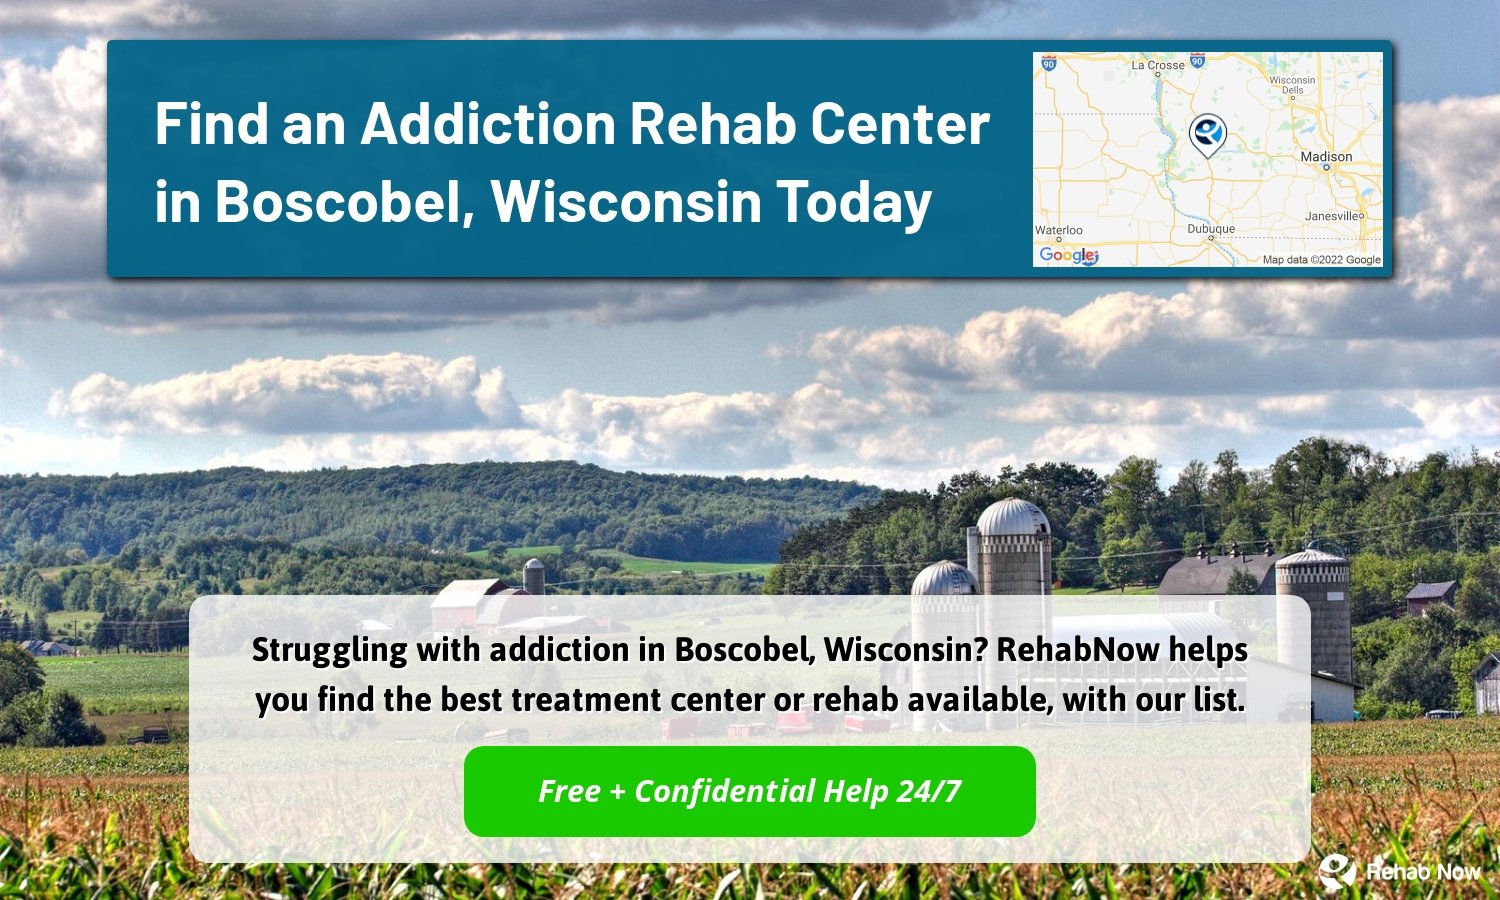 Struggling with addiction in Boscobel, Wisconsin? RehabNow helps you find the best treatment center or rehab available, with our list.